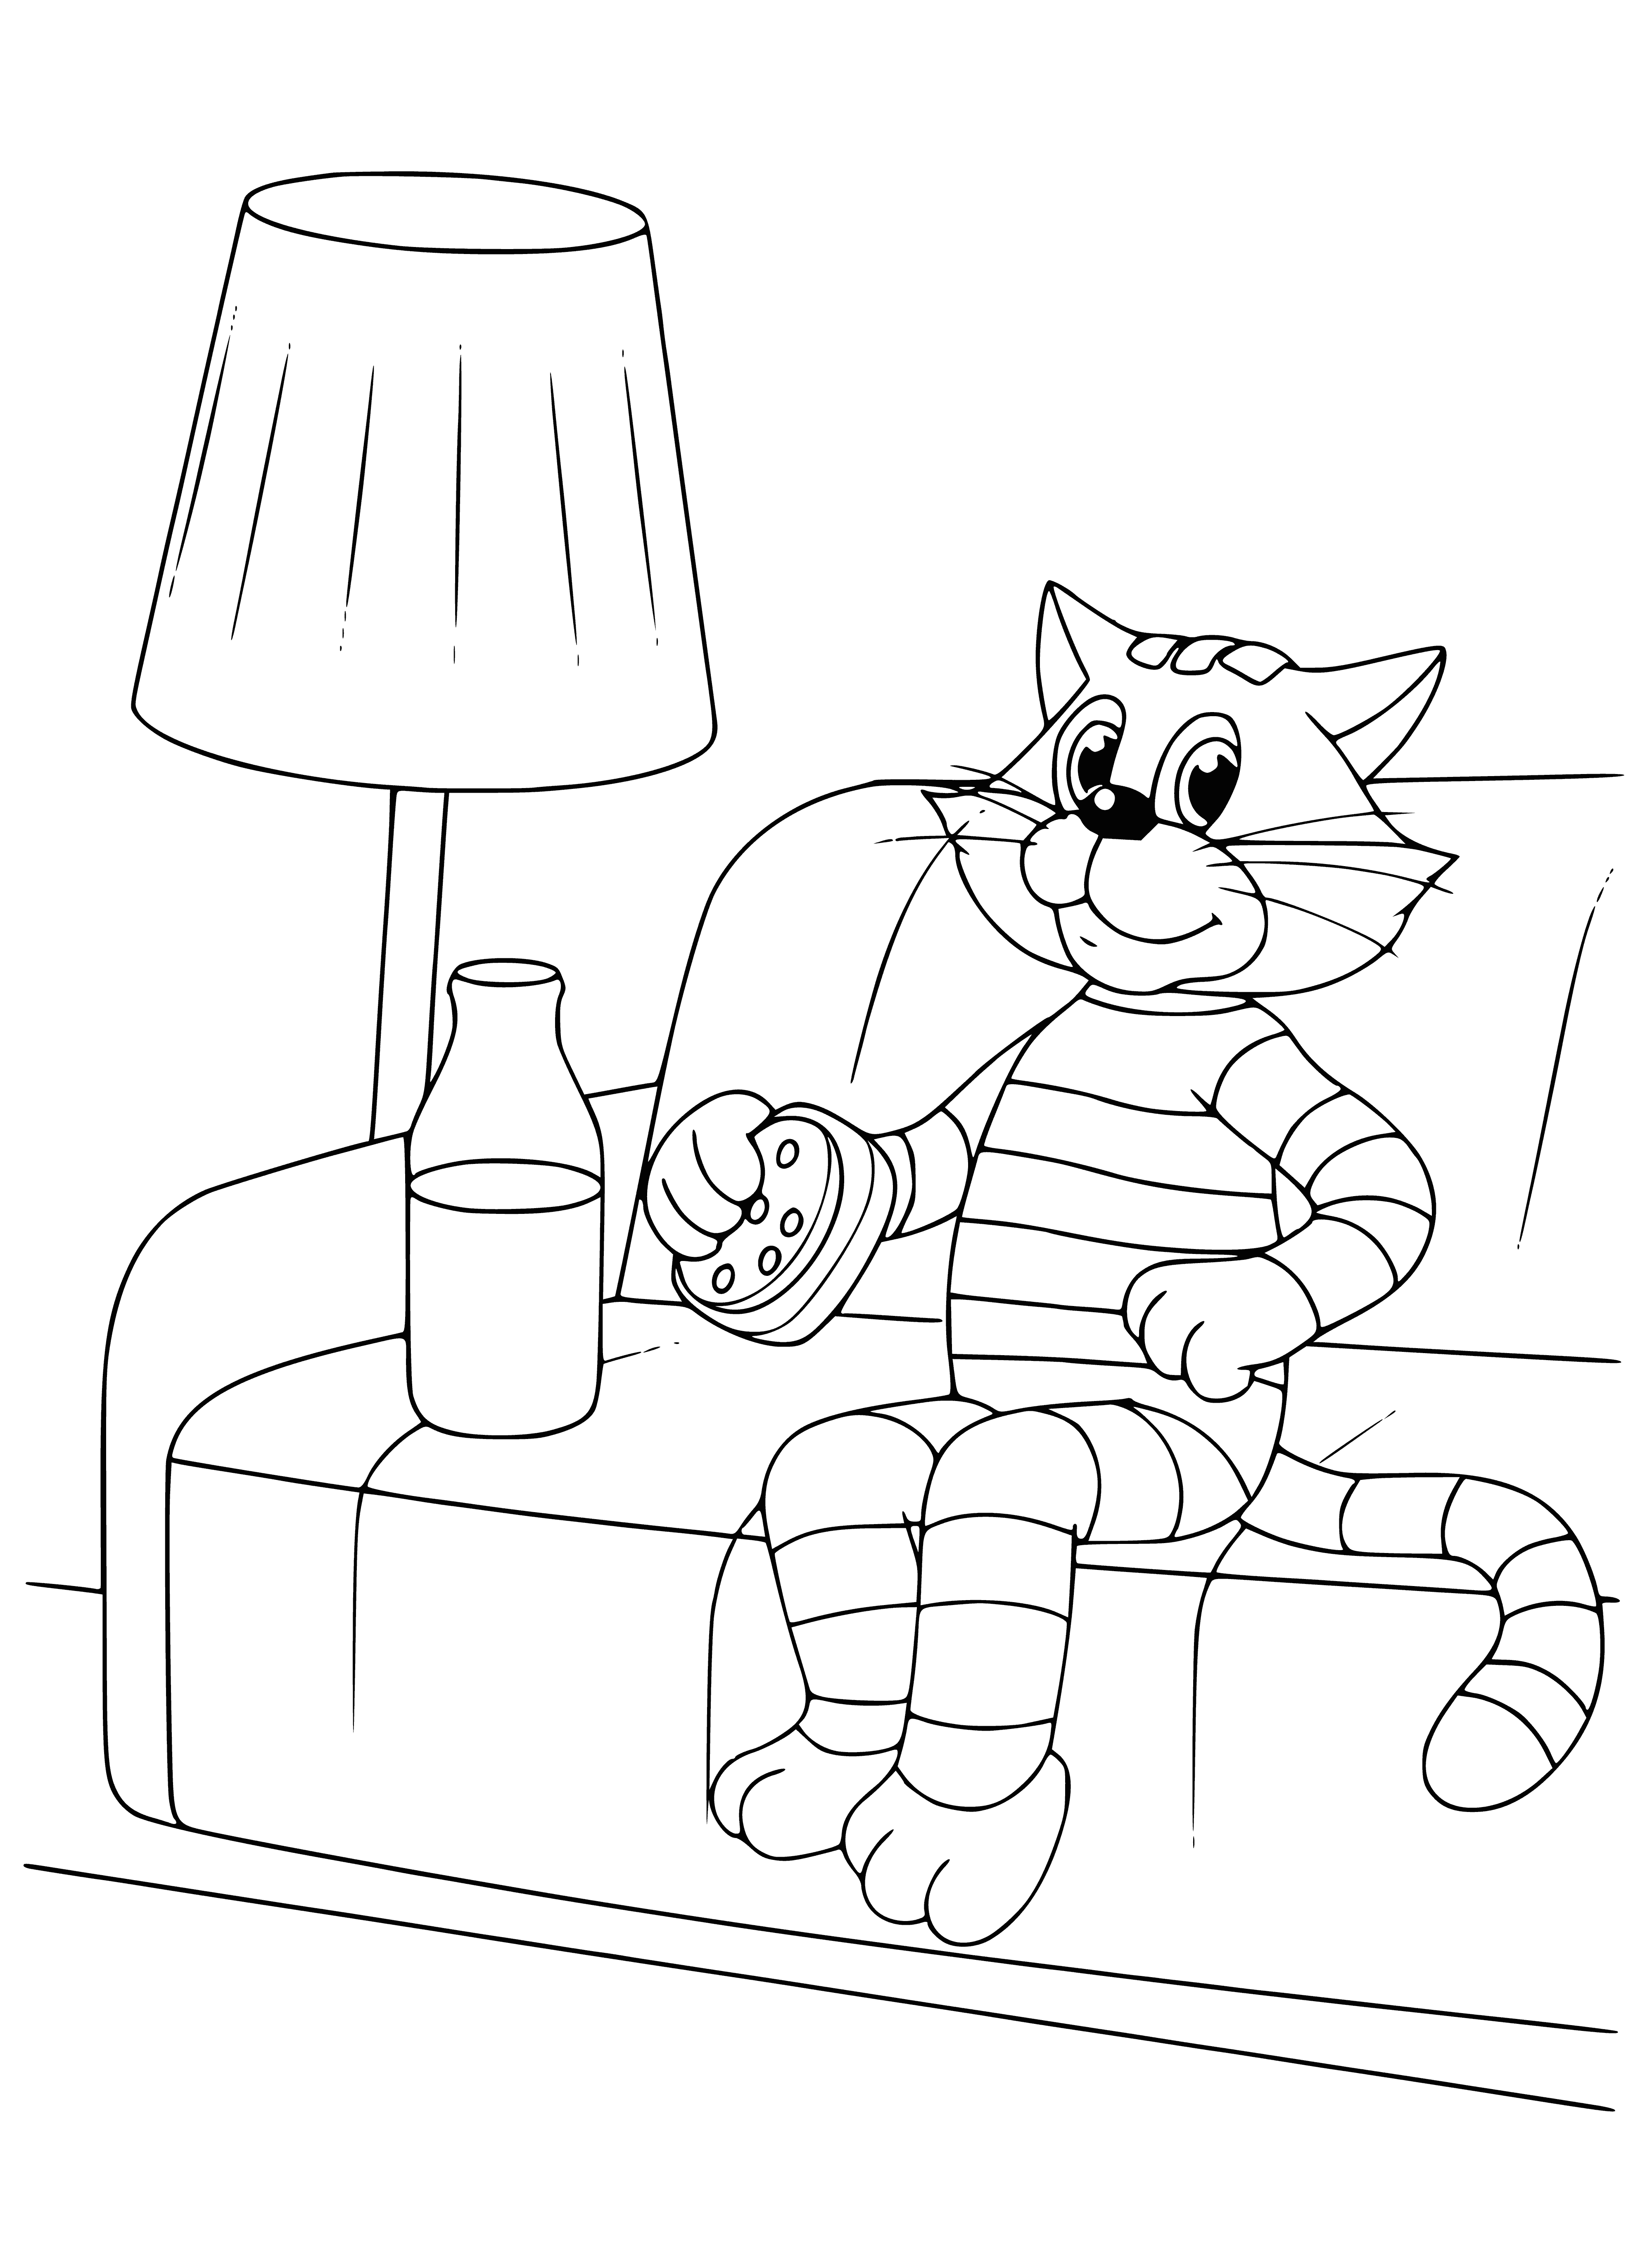 coloring page: Cat Matroskin stares blankly at a cheese & veggie sandwich in its paws.